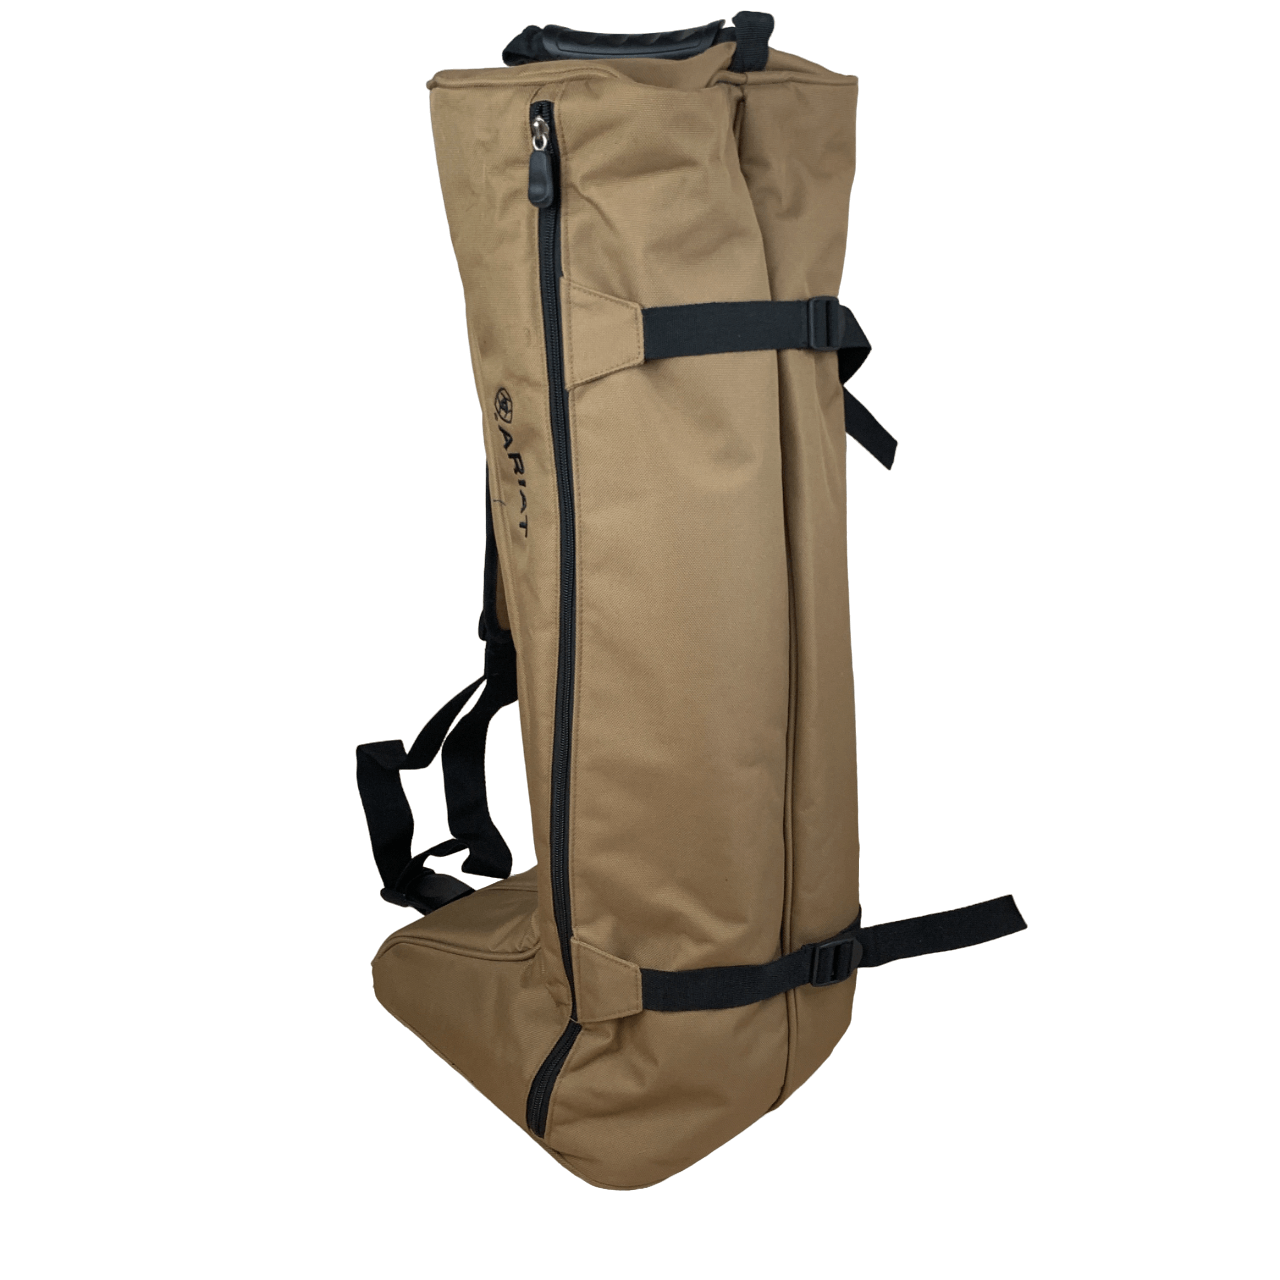 Ariat Tall Boot Bag in Tan - One Size